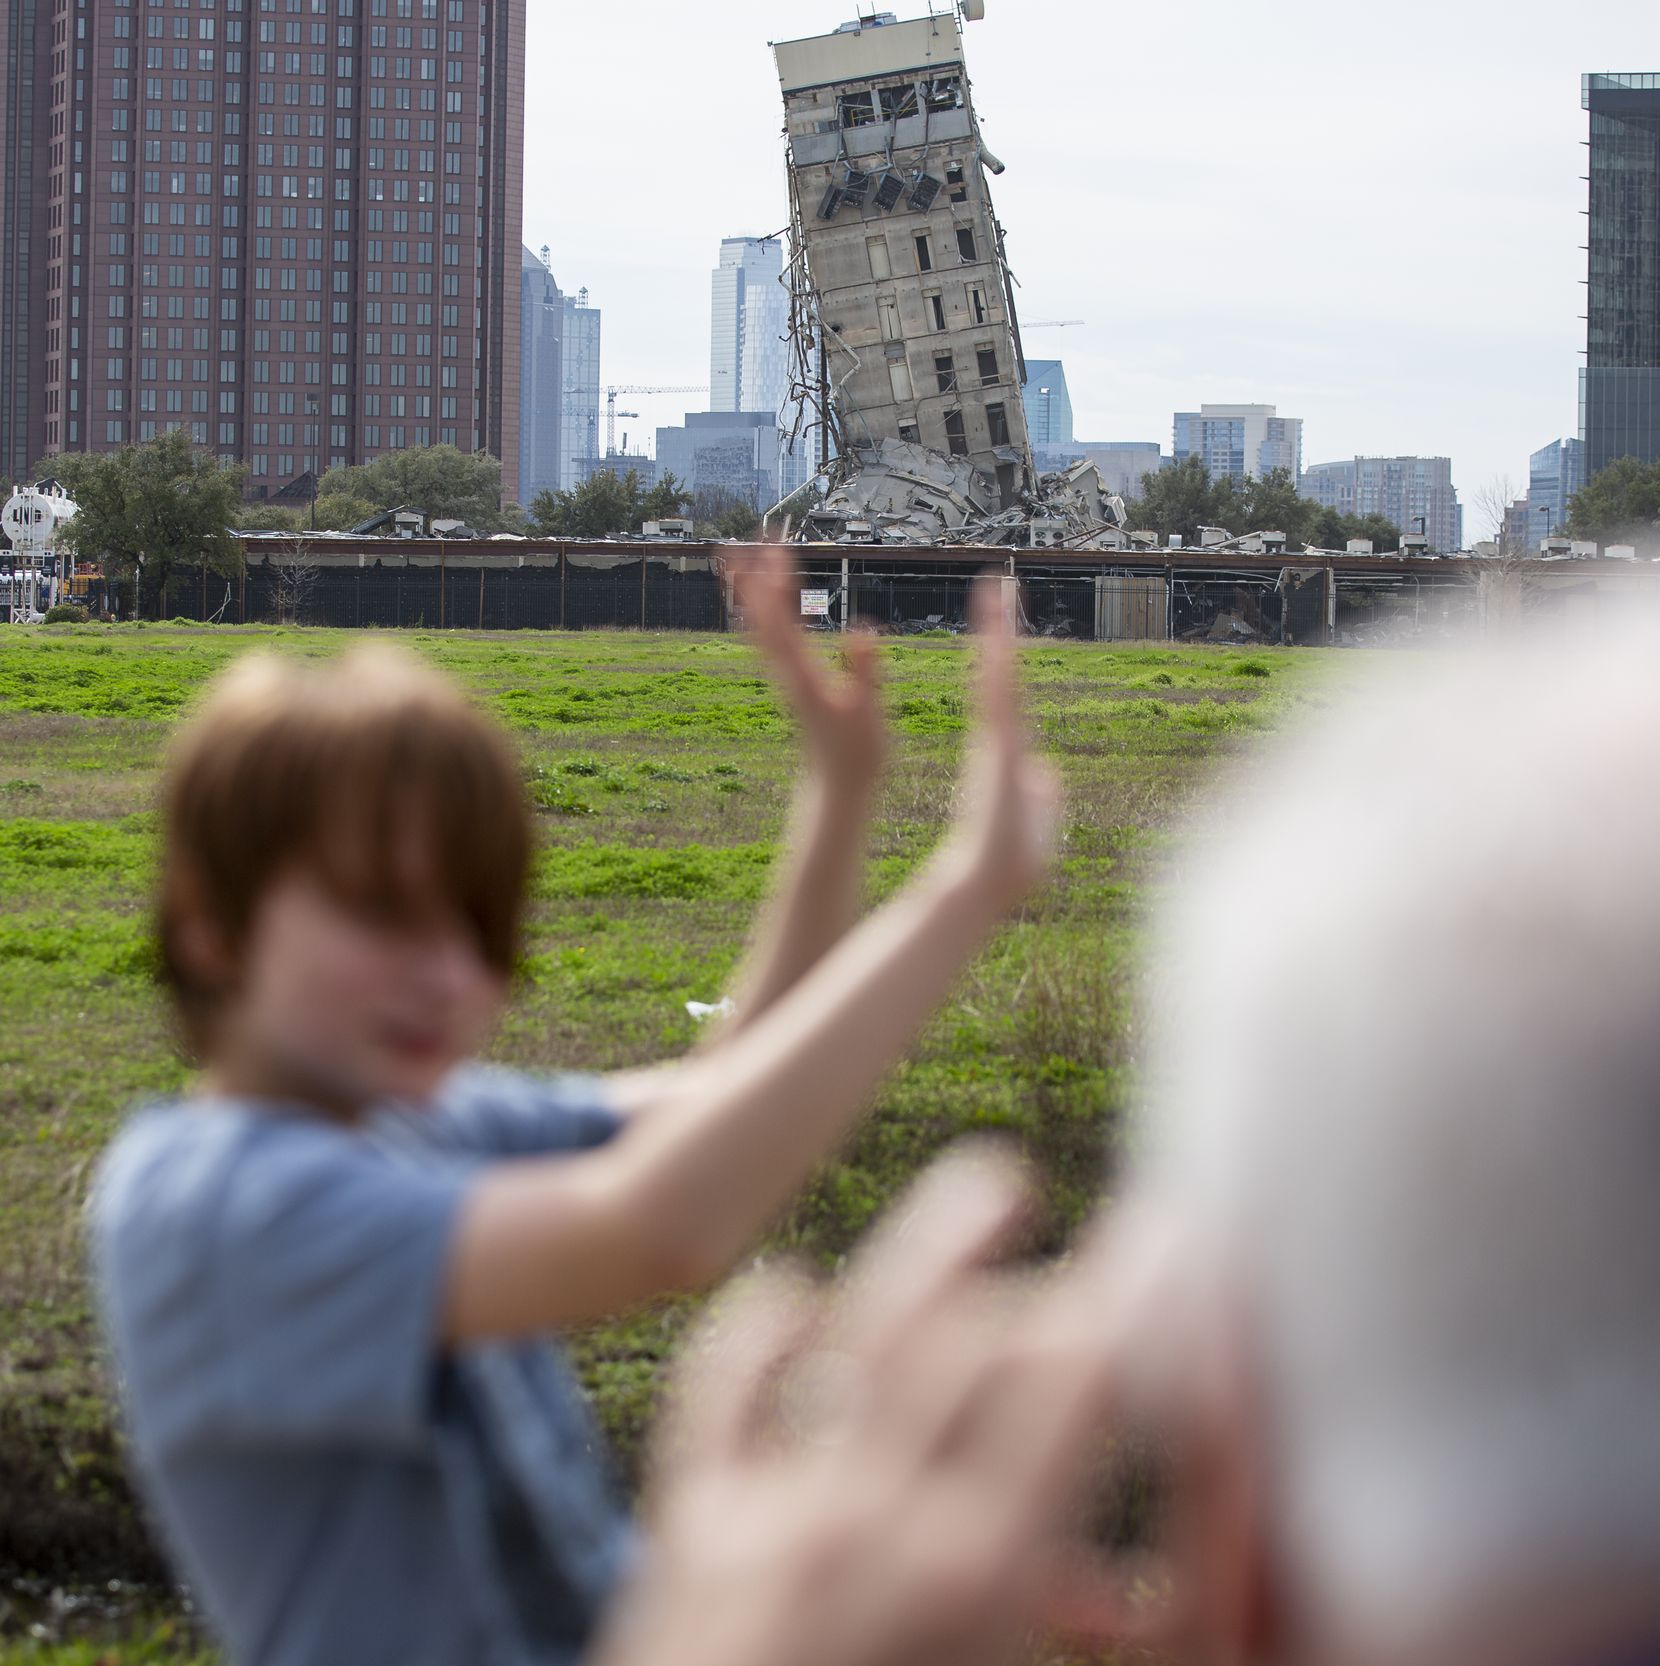 Randy Gibson takes a photo Monday of his son Andrew, 11, in front of the "Leaning Tower of Dallas."